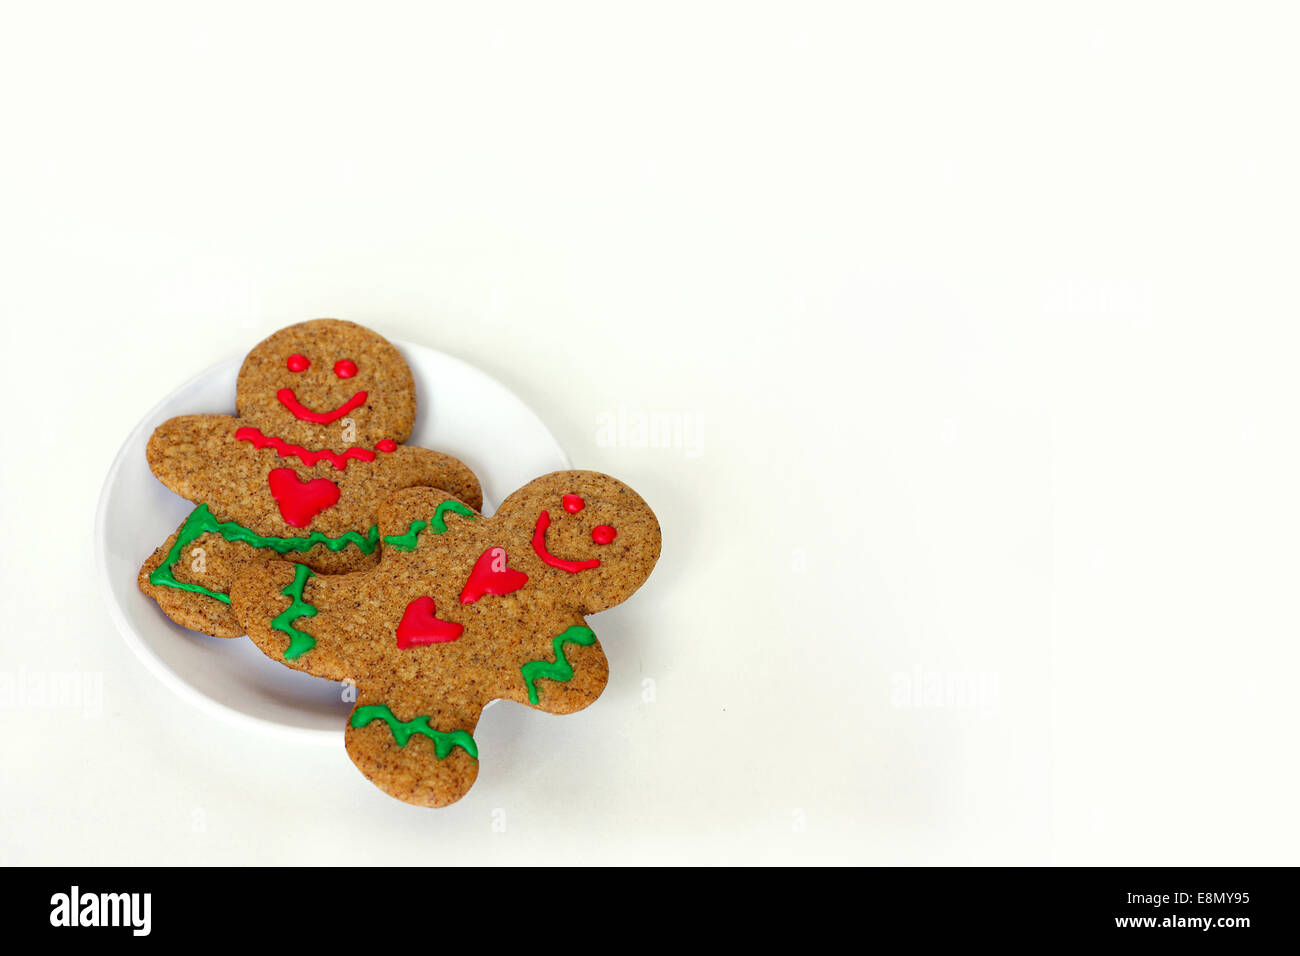 A Christmas gingerbread man cookie with hearts on his shirt is laying on a white plate with a gingerbread woman, on a white isol Stock Photo